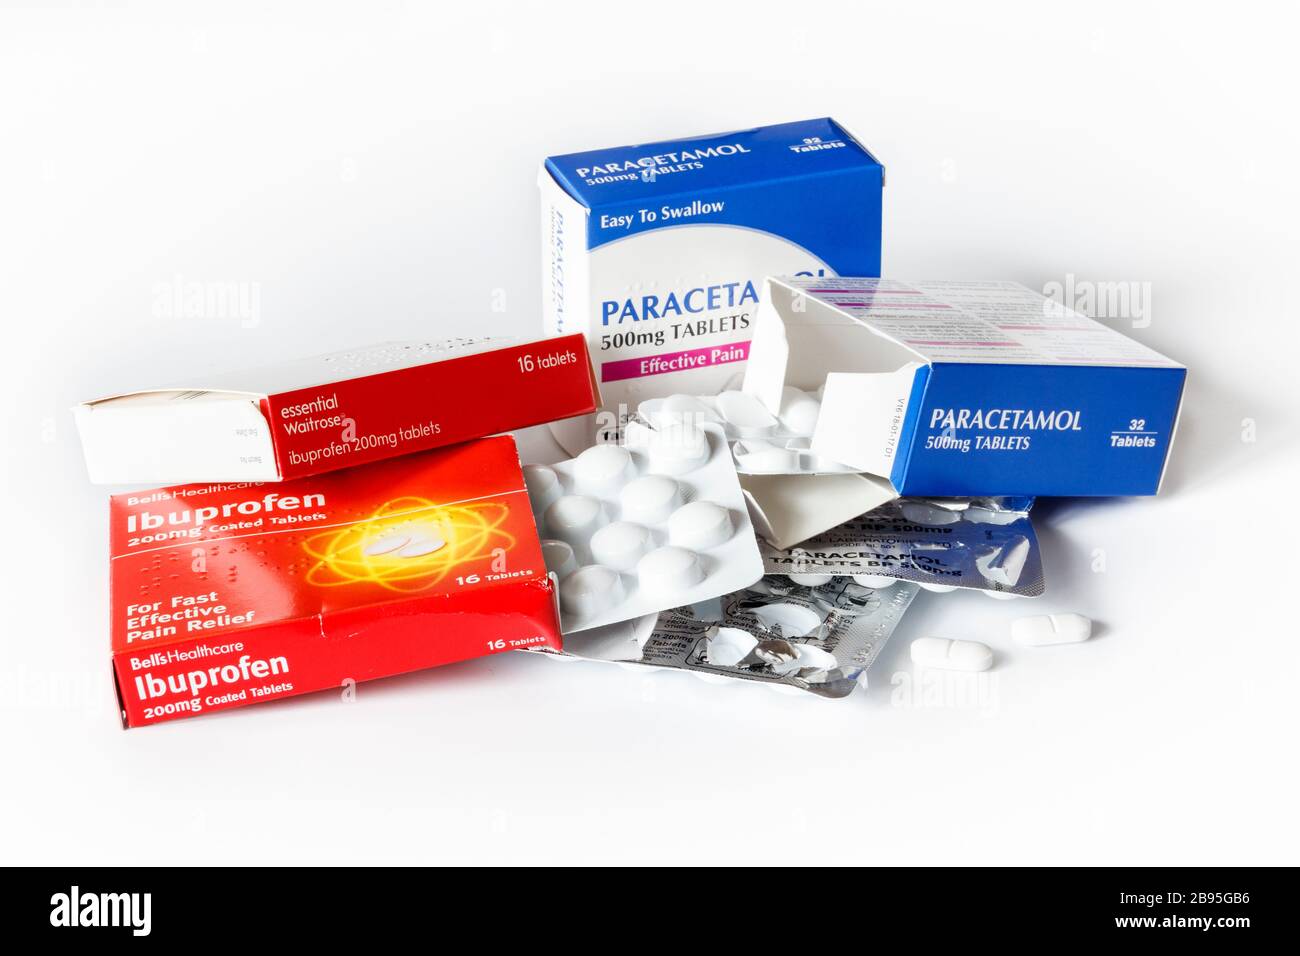 Boxes of ibuprofen and paracetamol tablets and blister packs, two tablets removed, against a plain white background Stock Photo